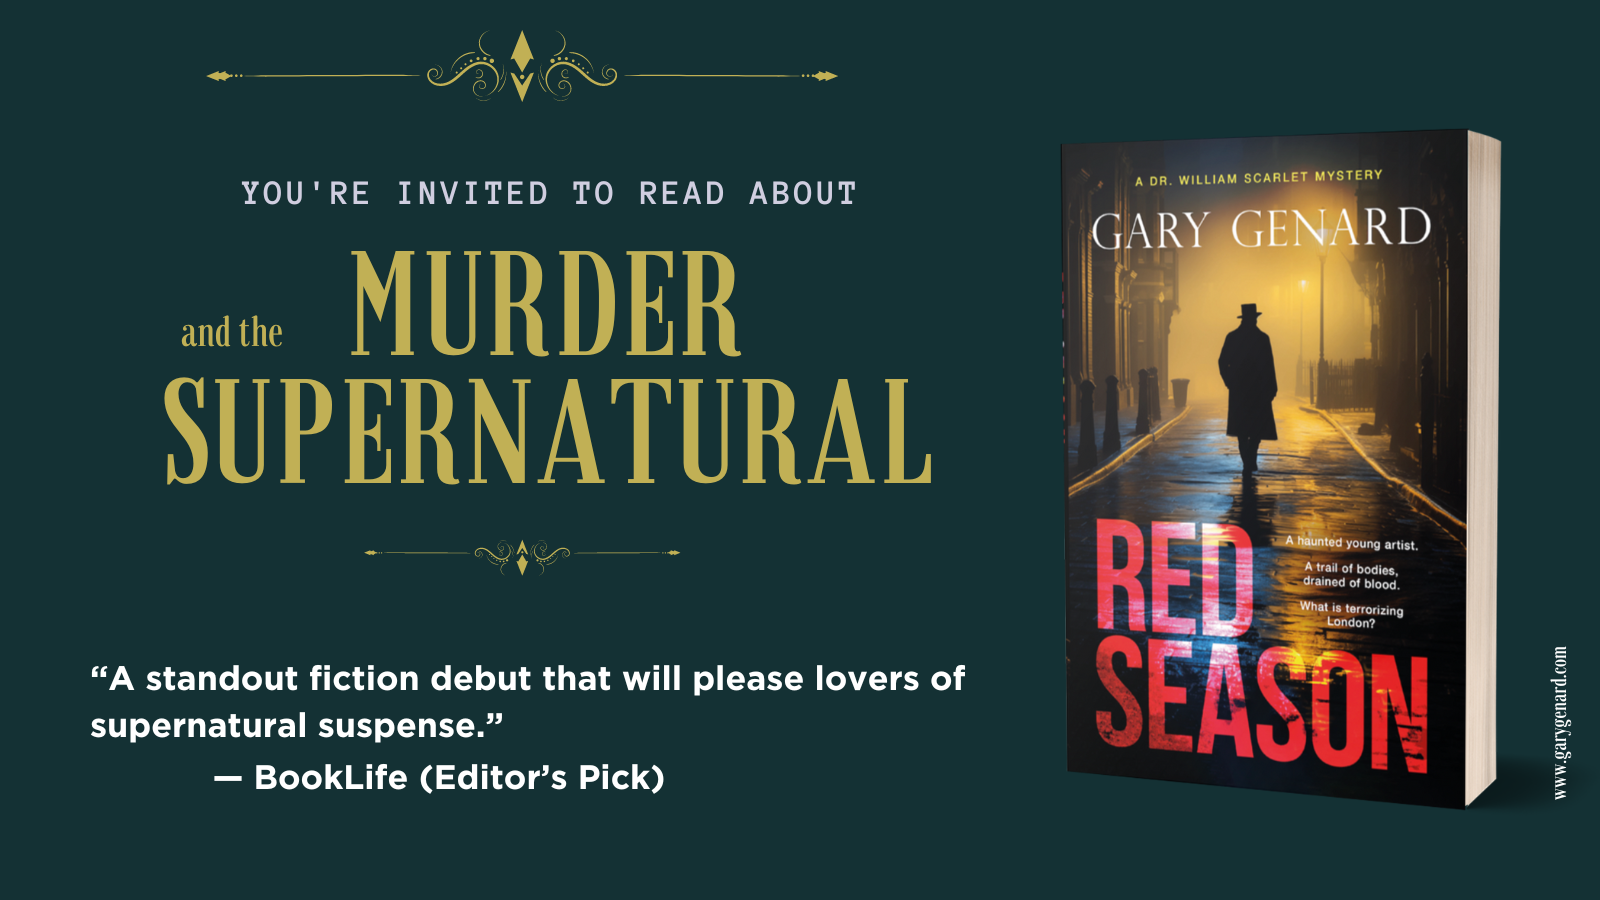 Book #1 in the Dr. William Scarlet Mysteries, Red Season, by Gary Genard.